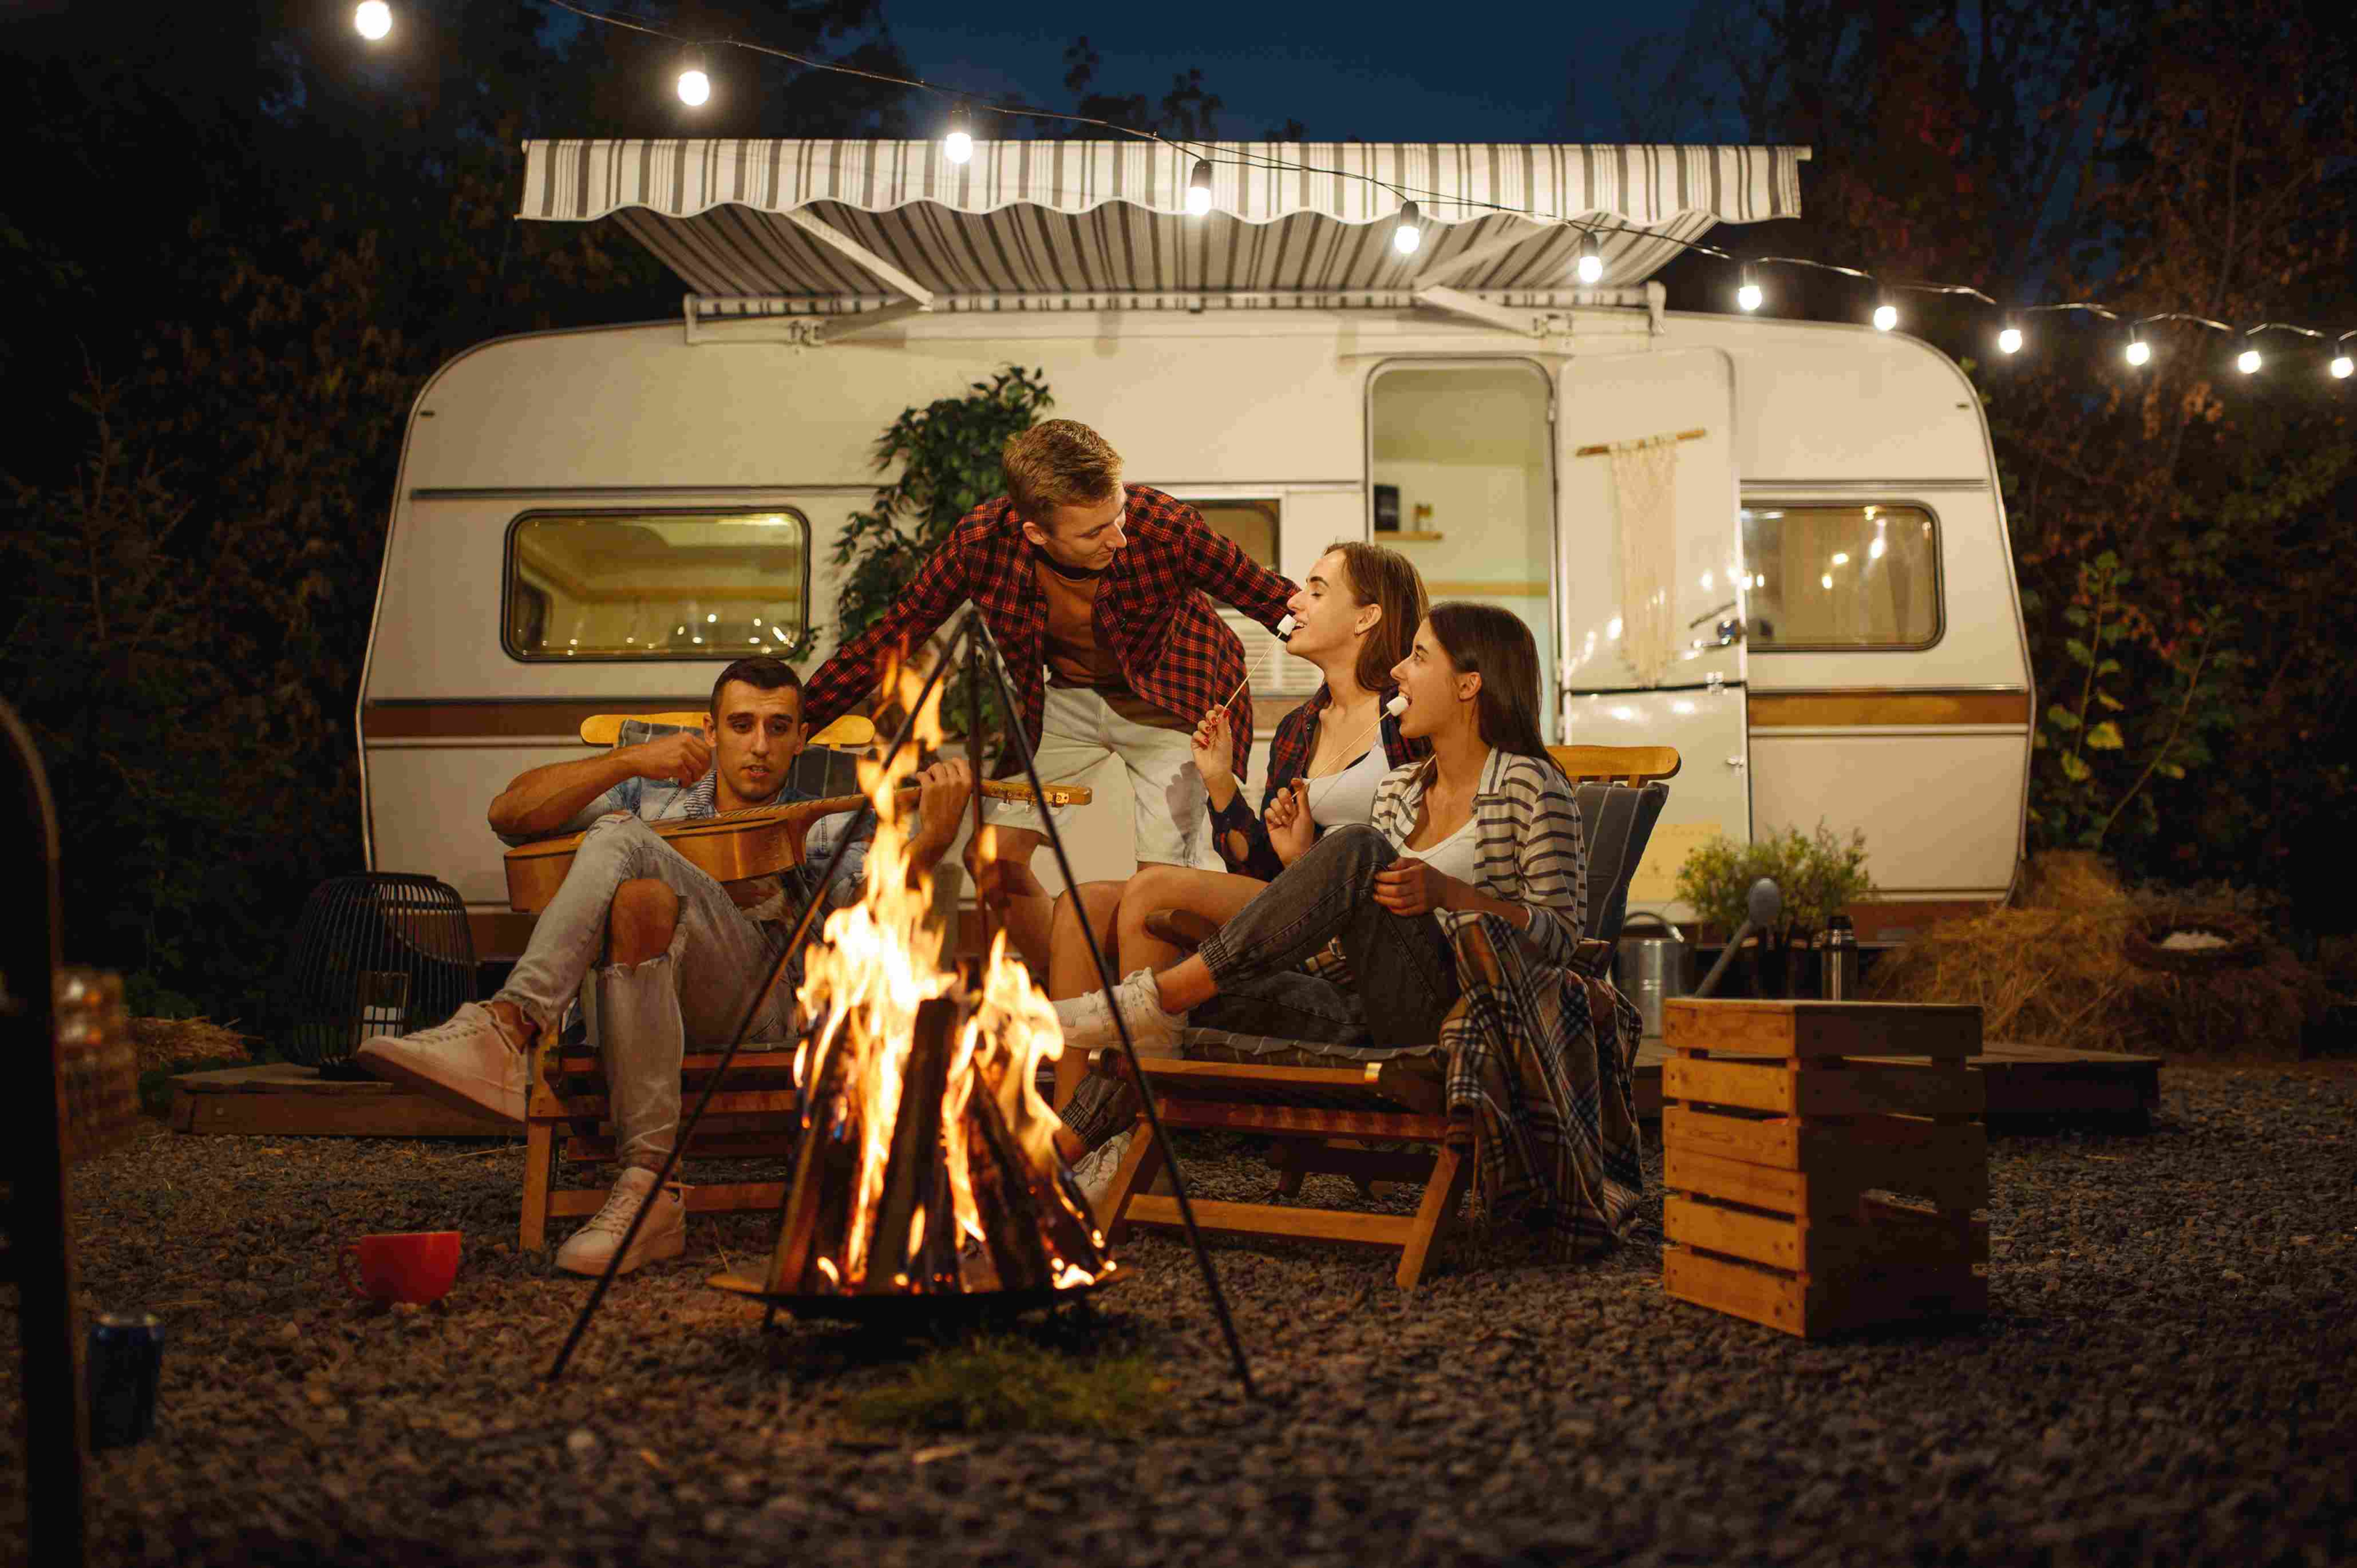 Four friends sitting around a campfire in front of a campervan eating marshmallows